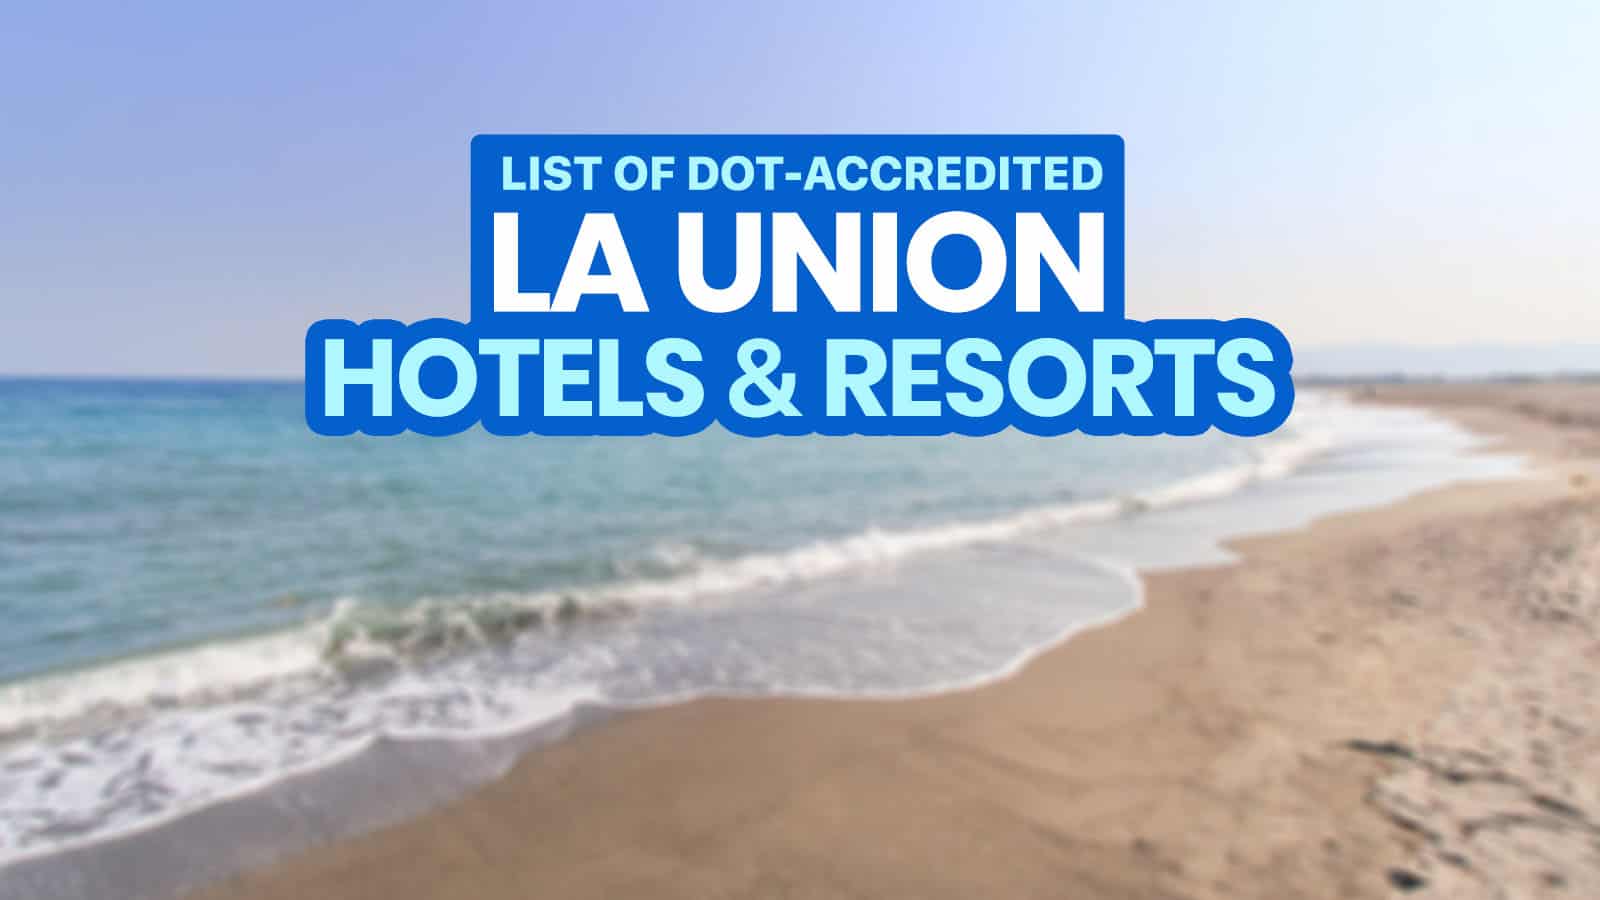 List of DOT-Accredited Hotels & Beach Resorts in LA UNION